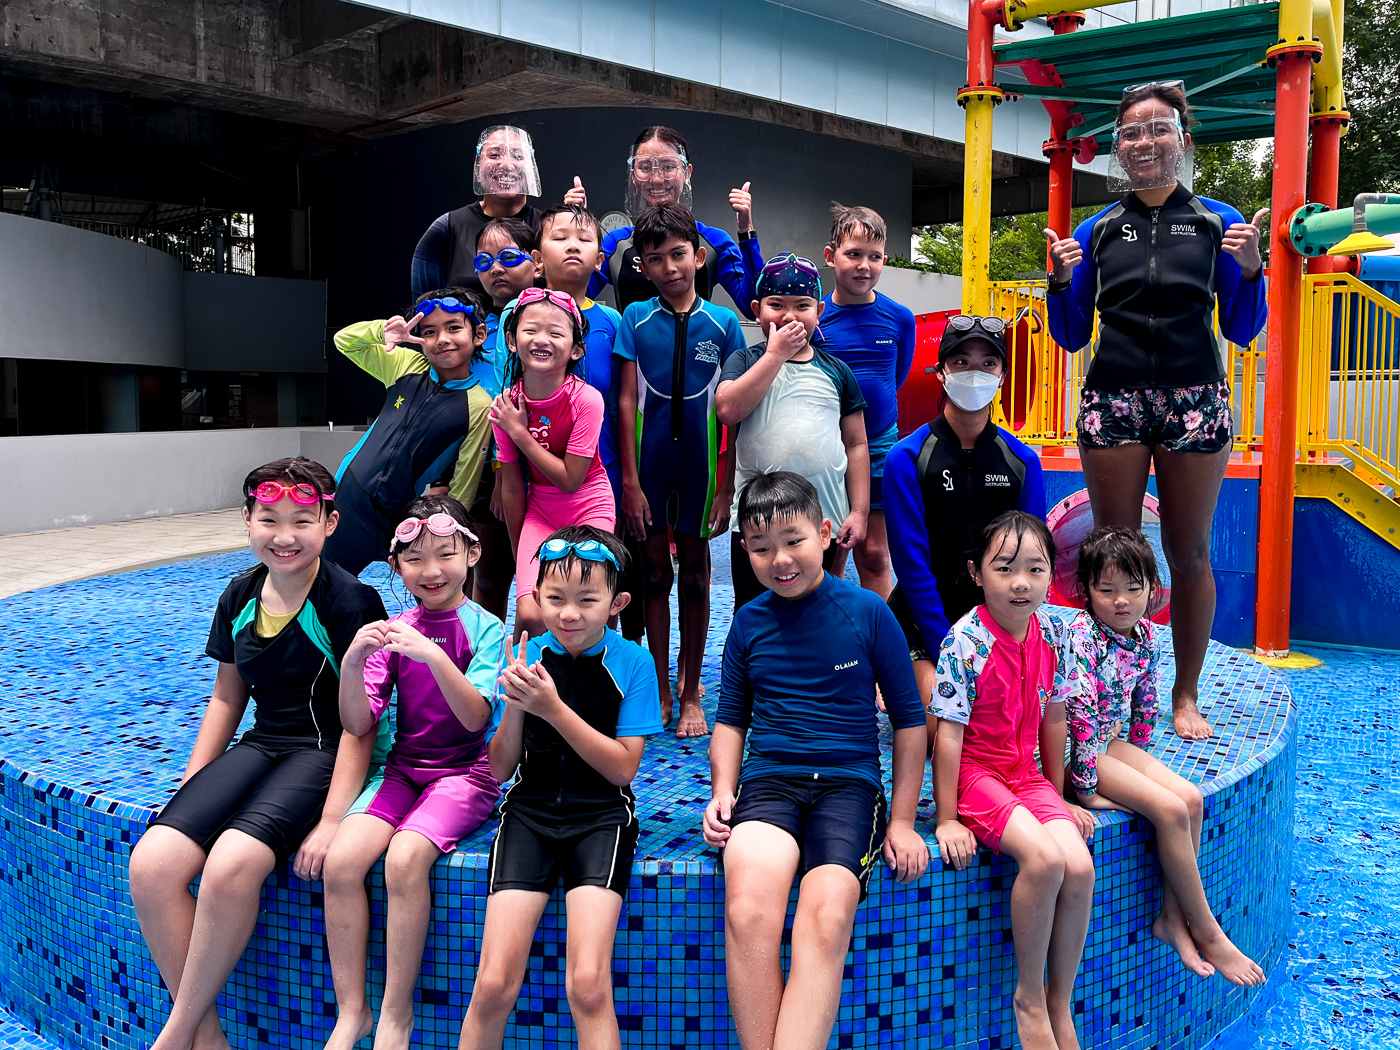 Group of joyful kids posing in front of the water playground equipment at the NTU@one-north swimming pool.